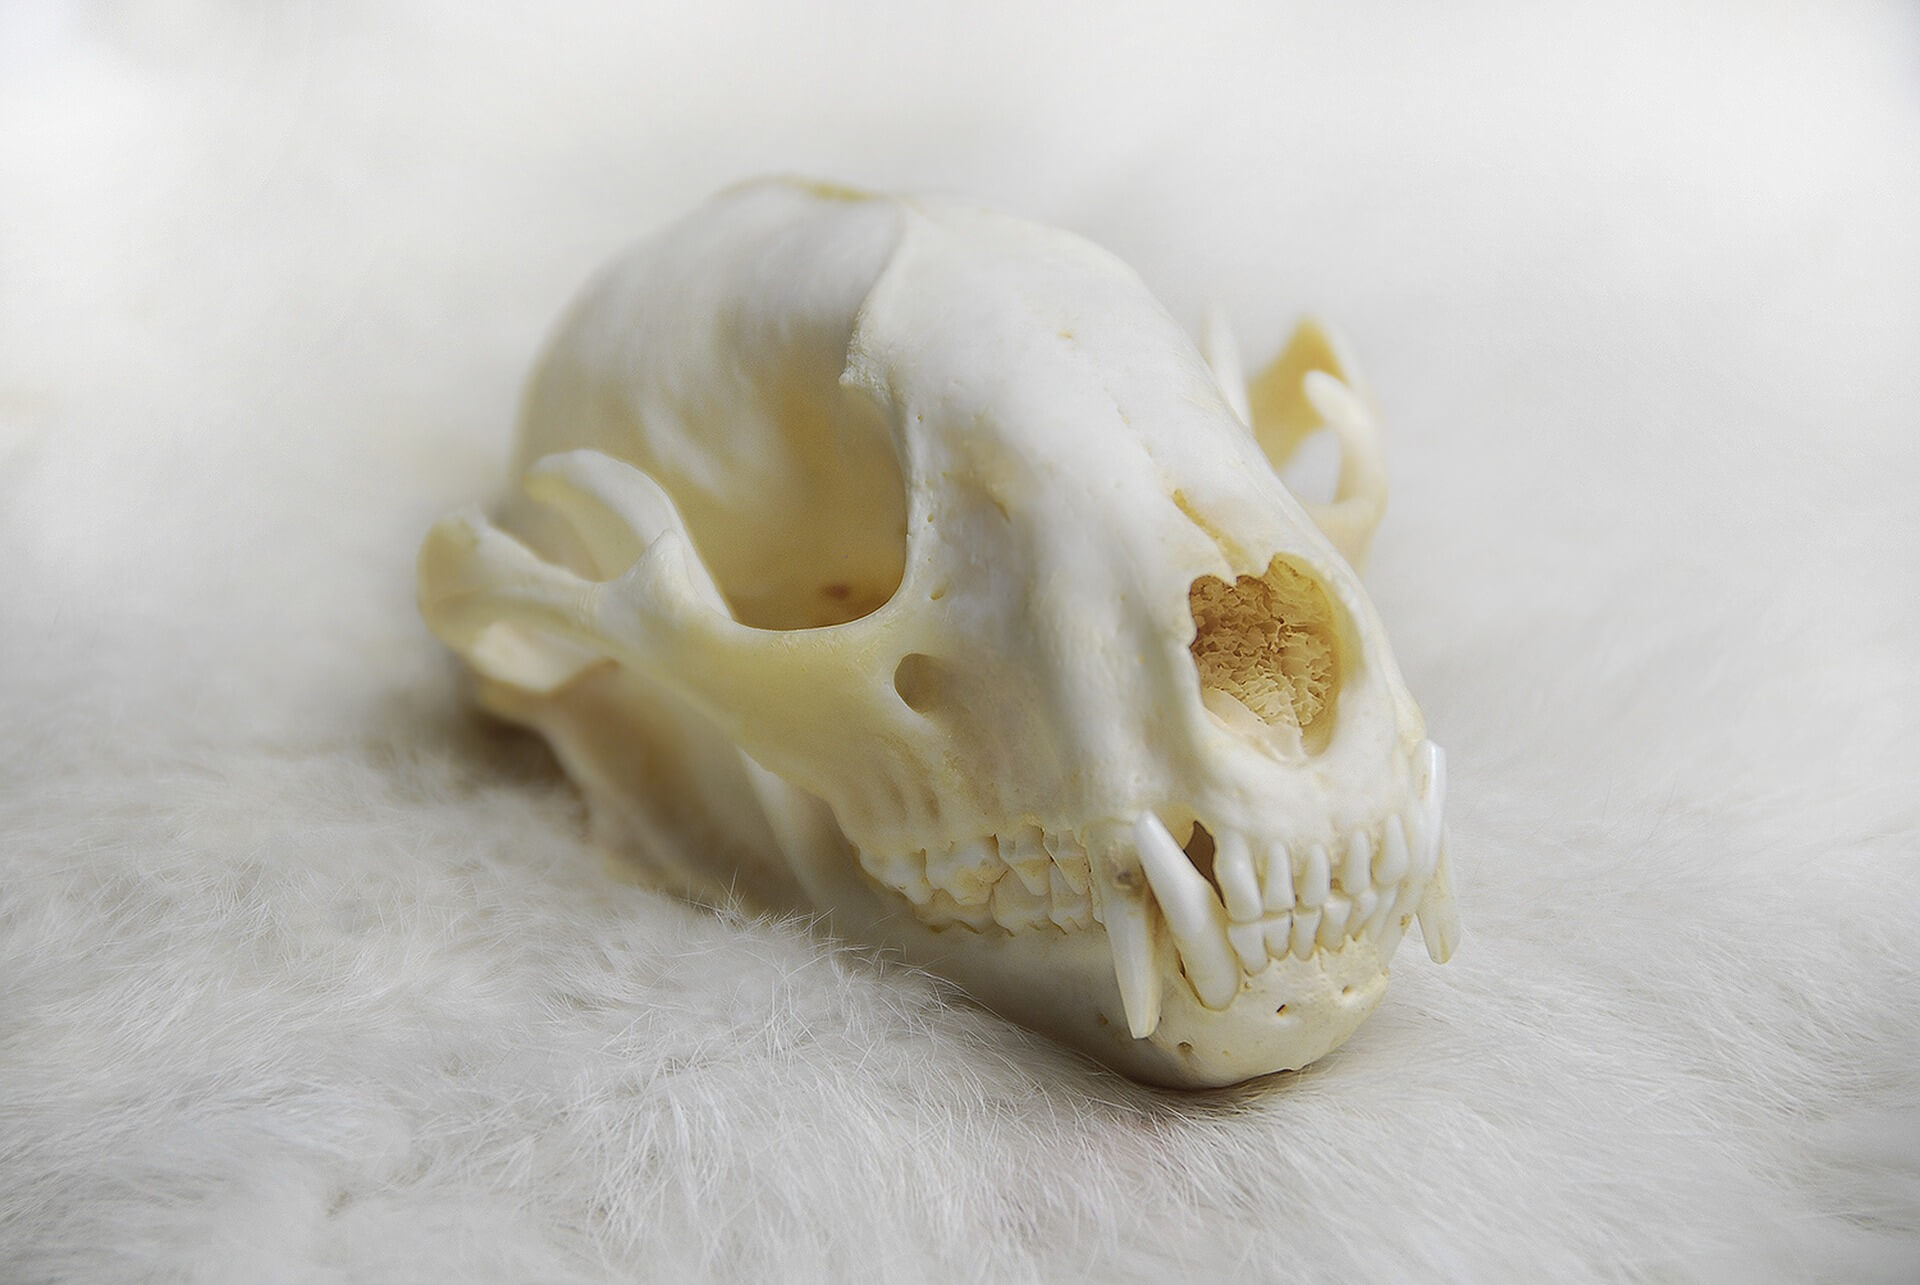 Skull cleaning: Five steps for cleaning bone specimens